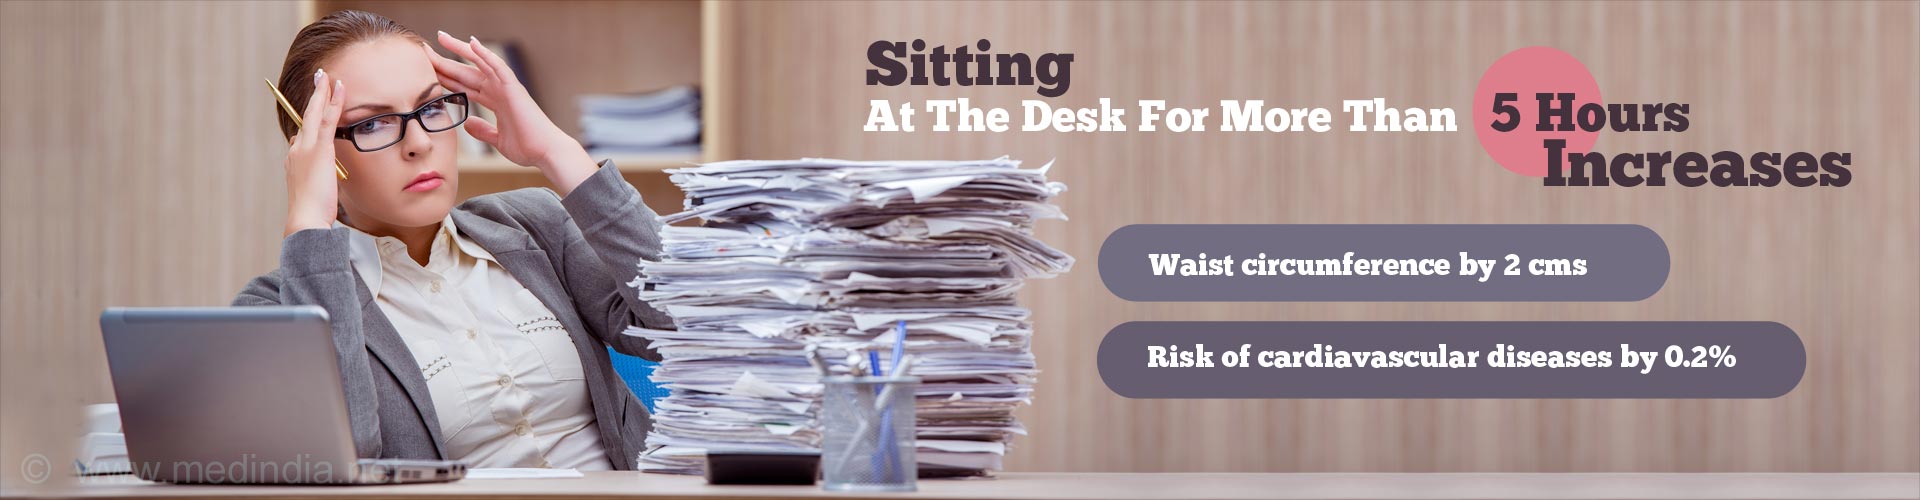 Sitting at the desk for more than 5 hours increases
- waist circumference by 2 cms
- risk of cardiovascular diseases by 0.2%